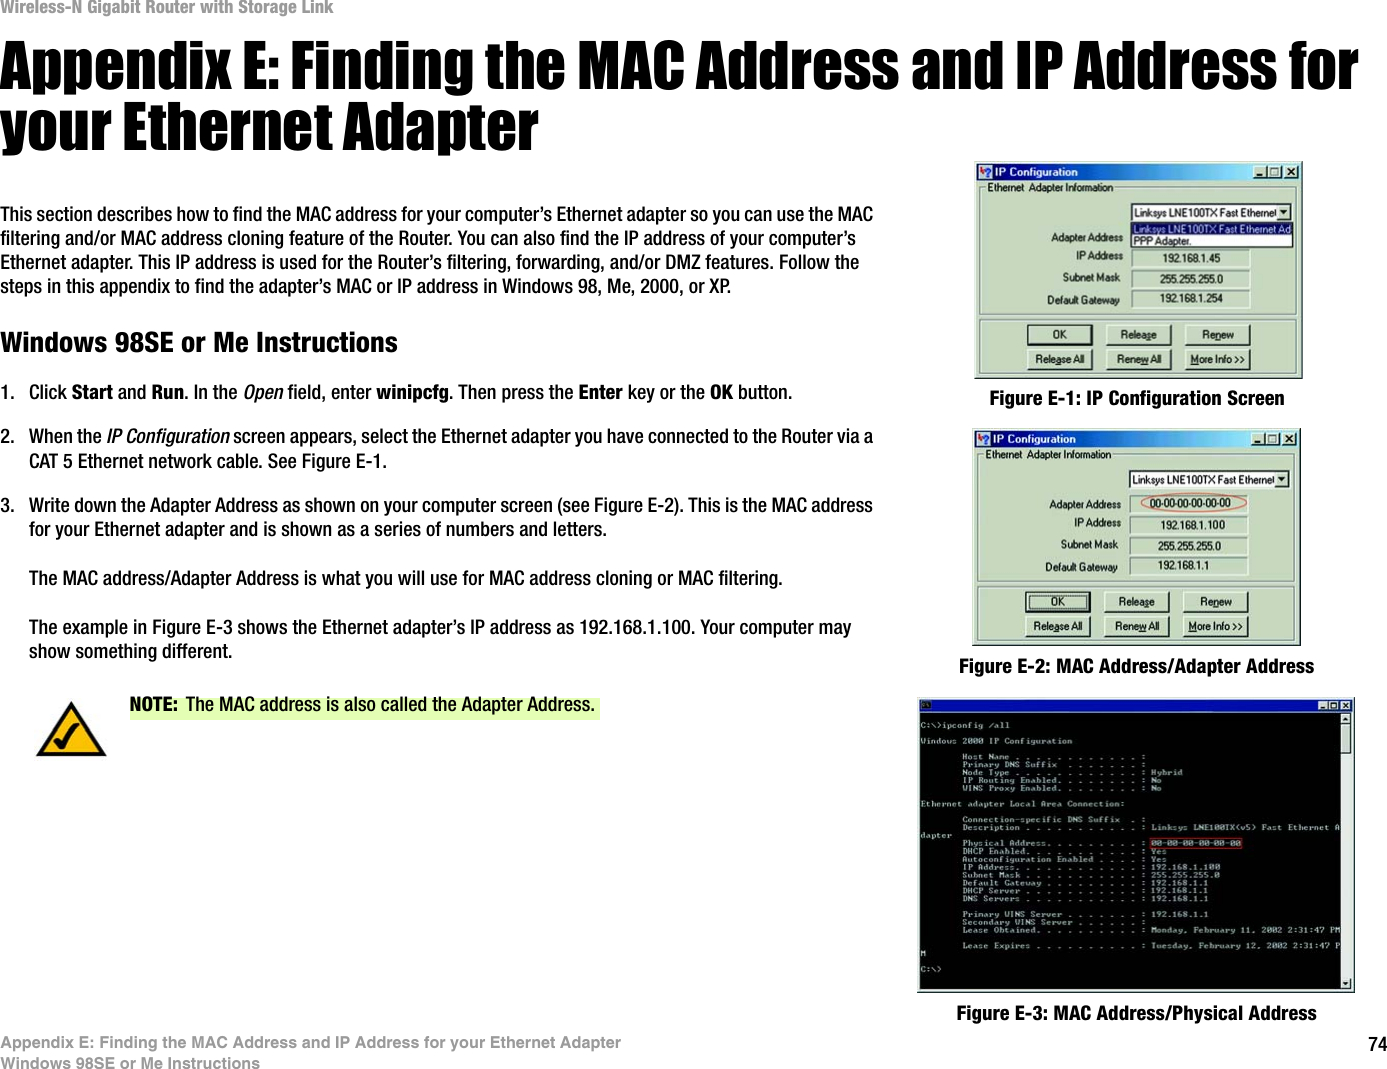 74Appendix E: Finding the MAC Address and IP Address for your Ethernet AdapterWindows 98SE or Me InstructionsWireless-N Gigabit Router with Storage LinkAppendix E: Finding the MAC Address and IP Address for your Ethernet AdapterThis section describes how to find the MAC address for your computer’s Ethernet adapter so you can use the MAC filtering and/or MAC address cloning feature of the Router. You can also find the IP address of your computer’s Ethernet adapter. This IP address is used for the Router’s filtering, forwarding, and/or DMZ features. Follow the steps in this appendix to find the adapter’s MAC or IP address in Windows 98, Me, 2000, or XP.Windows 98SE or Me Instructions1. Click Start and Run. In the Open field, enter winipcfg. Then press the Enter key or the OK button. 2. When the IP Configuration screen appears, select the Ethernet adapter you have connected to the Router via a CAT 5 Ethernet network cable. See Figure E-1.3. Write down the Adapter Address as shown on your computer screen (see Figure E-2). This is the MAC address for your Ethernet adapter and is shown as a series of numbers and letters.The MAC address/Adapter Address is what you will use for MAC address cloning or MAC filtering.The example in Figure E-3 shows the Ethernet adapter’s IP address as 192.168.1.100. Your computer may show something different. Figure E-2: MAC Address/Adapter AddressFigure E-1: IP Configuration ScreenNOTE: The MAC address is also called the Adapter Address.Figure E-3: MAC Address/Physical Address